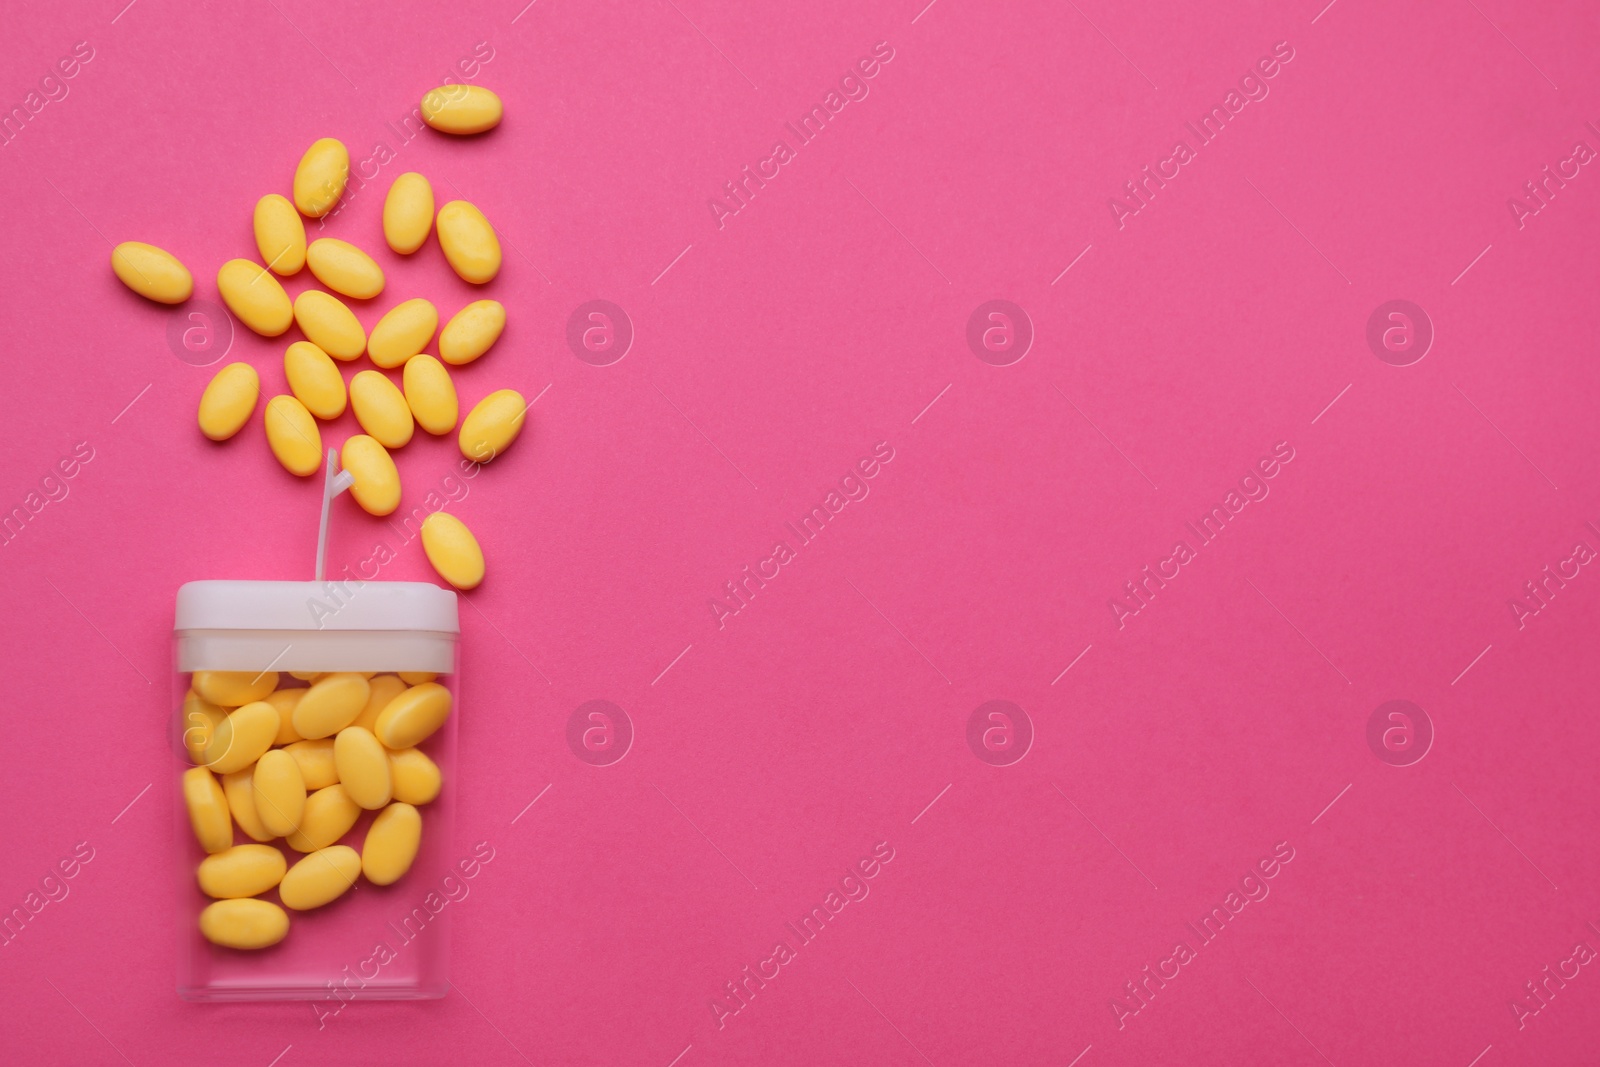 Photo of Tasty yellow dragee candies and container on pink background, flat lay. Space for text